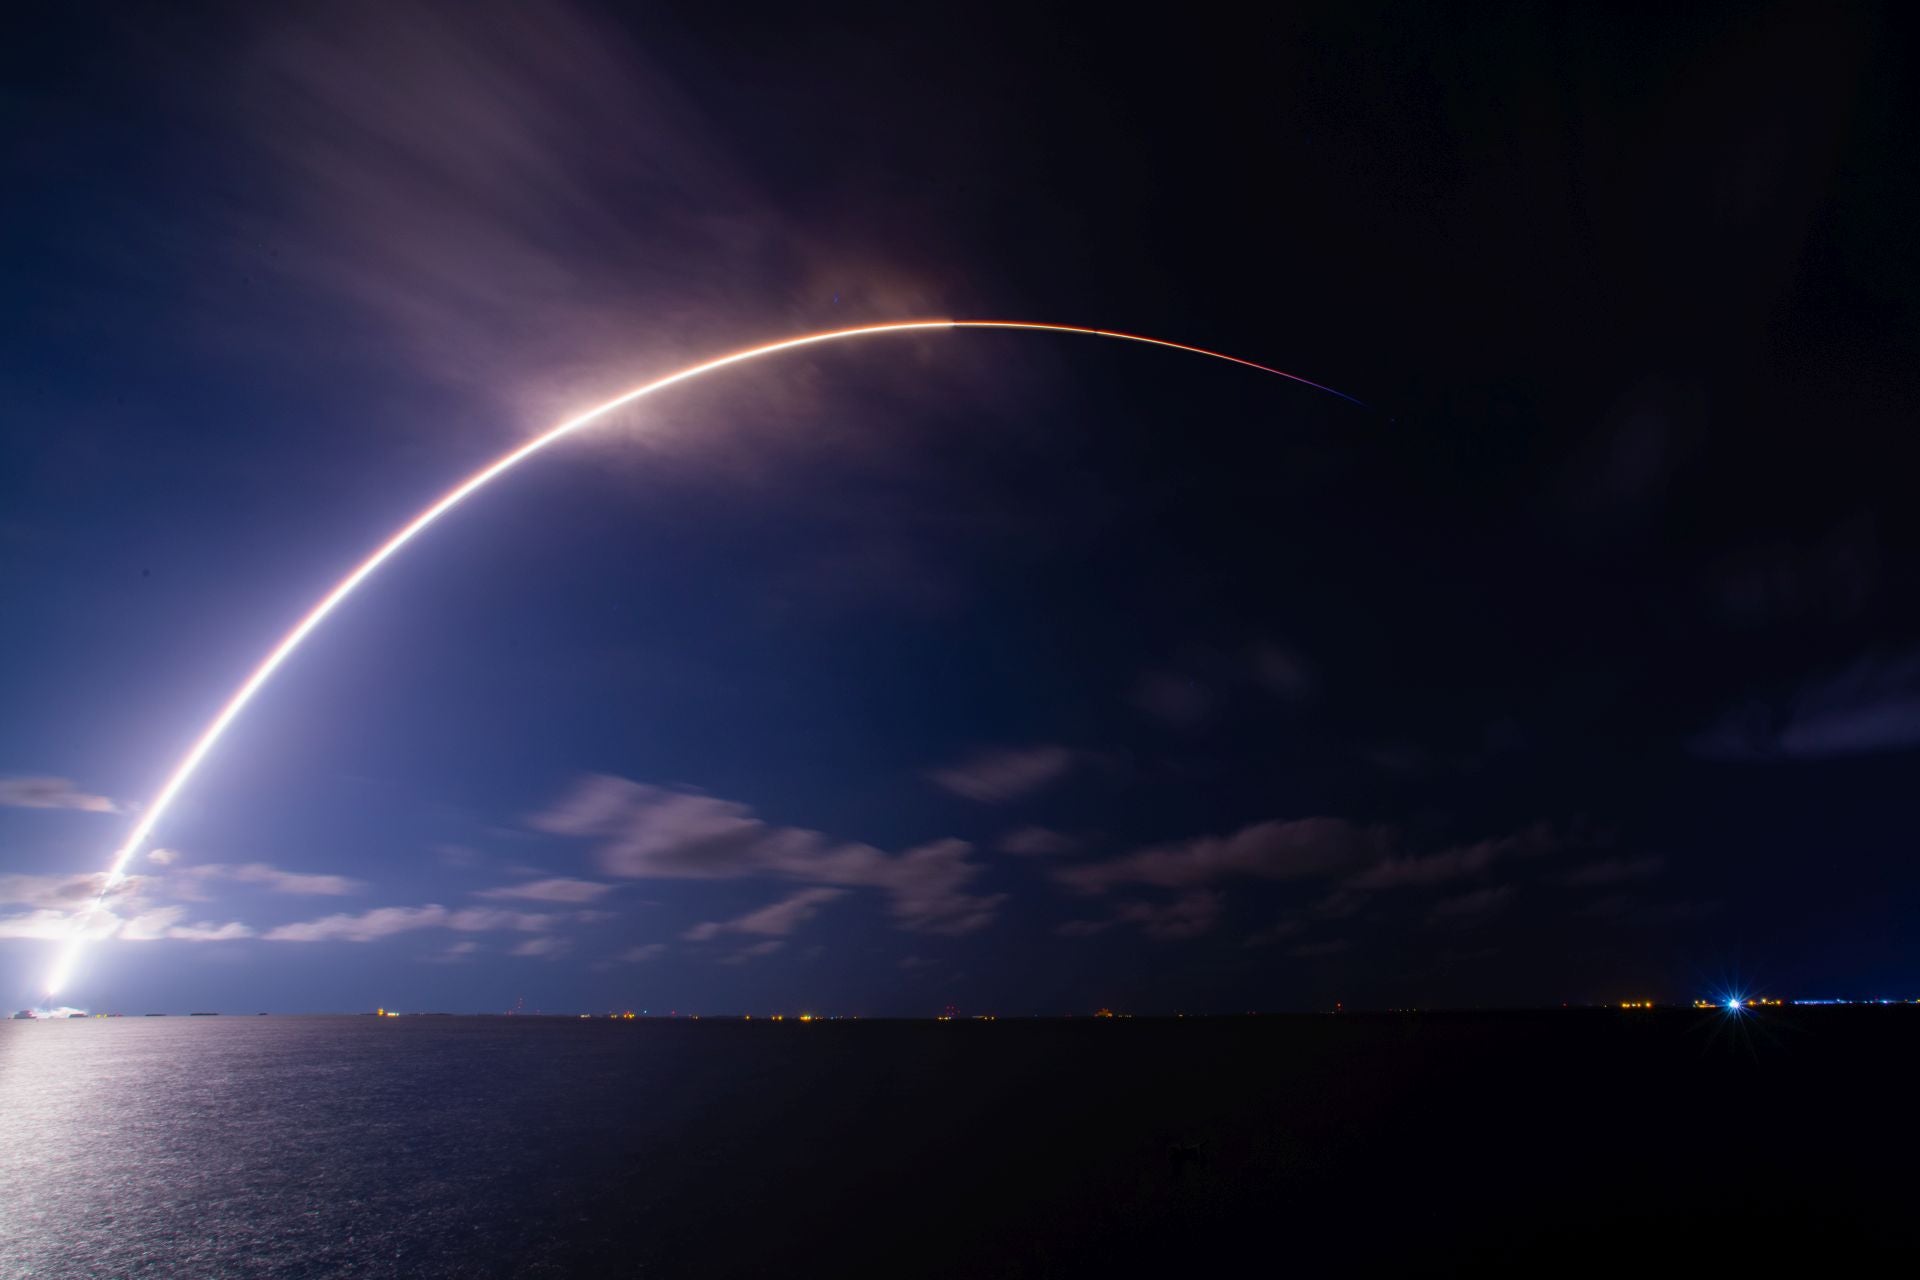 A Falcon 9 launches during a Starlink mission, May 14, 2023. (Photo: C&J Images)